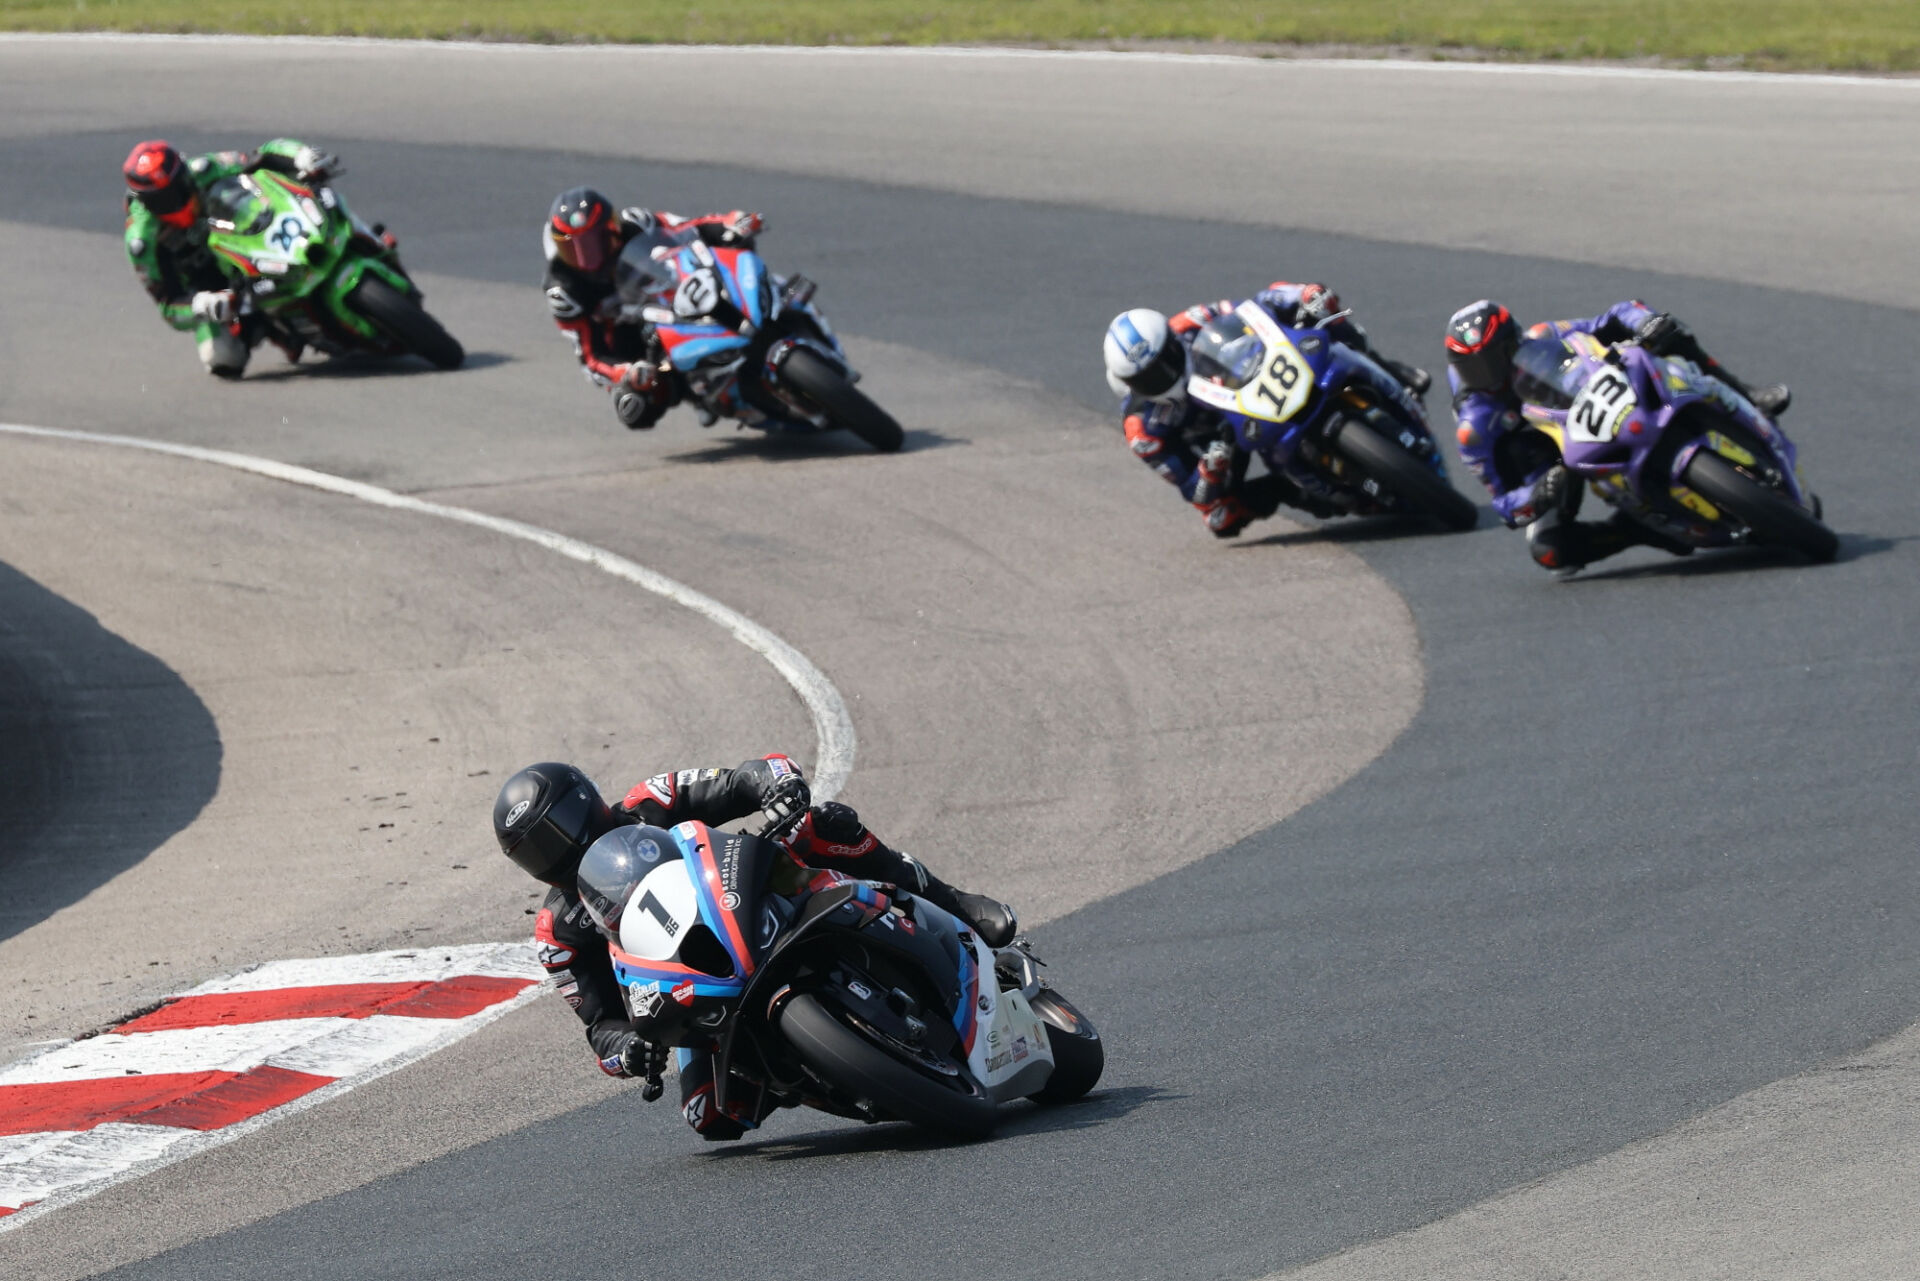 Ben Young (1) leads Saturday's Superbike race at Canadian Tire Motorsport Park with Sam Guerin (2), Alex Dumas (23), and Tomas Casas (18) in pursuit. Photo by Rob O'Brien, courtesy CSBK.